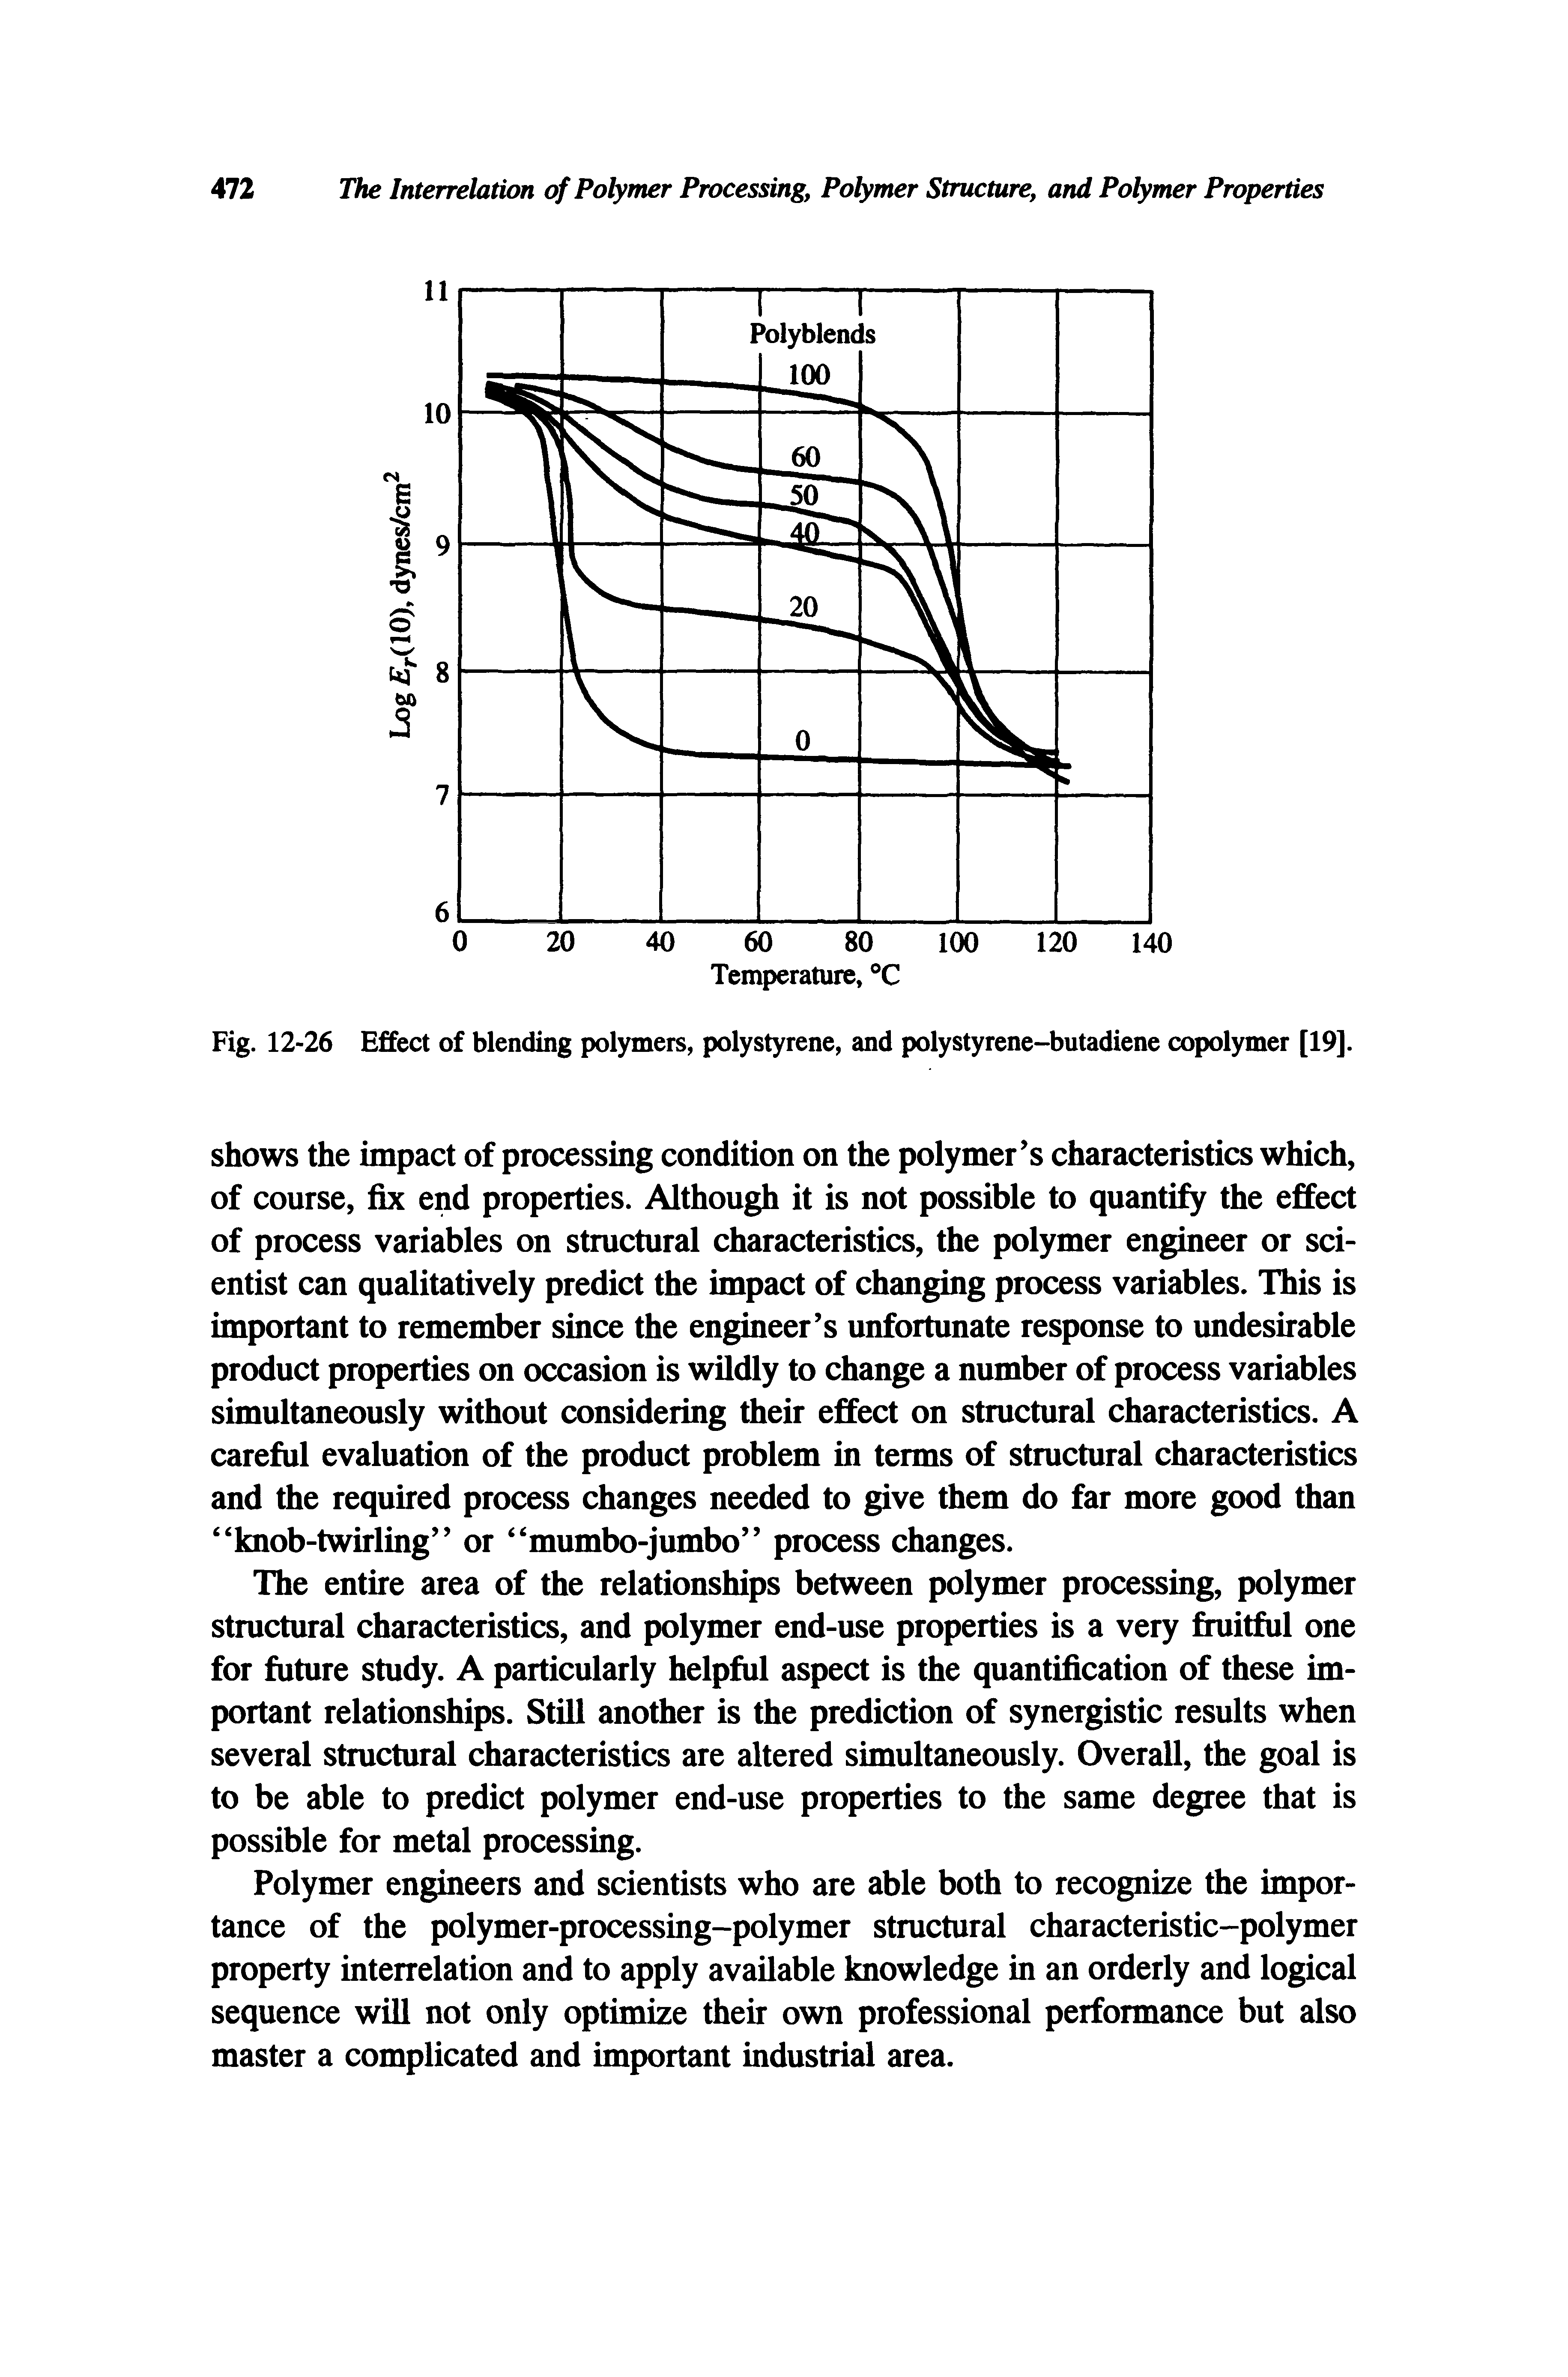 Fig. 12-26 Effect of blending polymers, polystyrene, and polystyrene-butadiene copolymer [19].